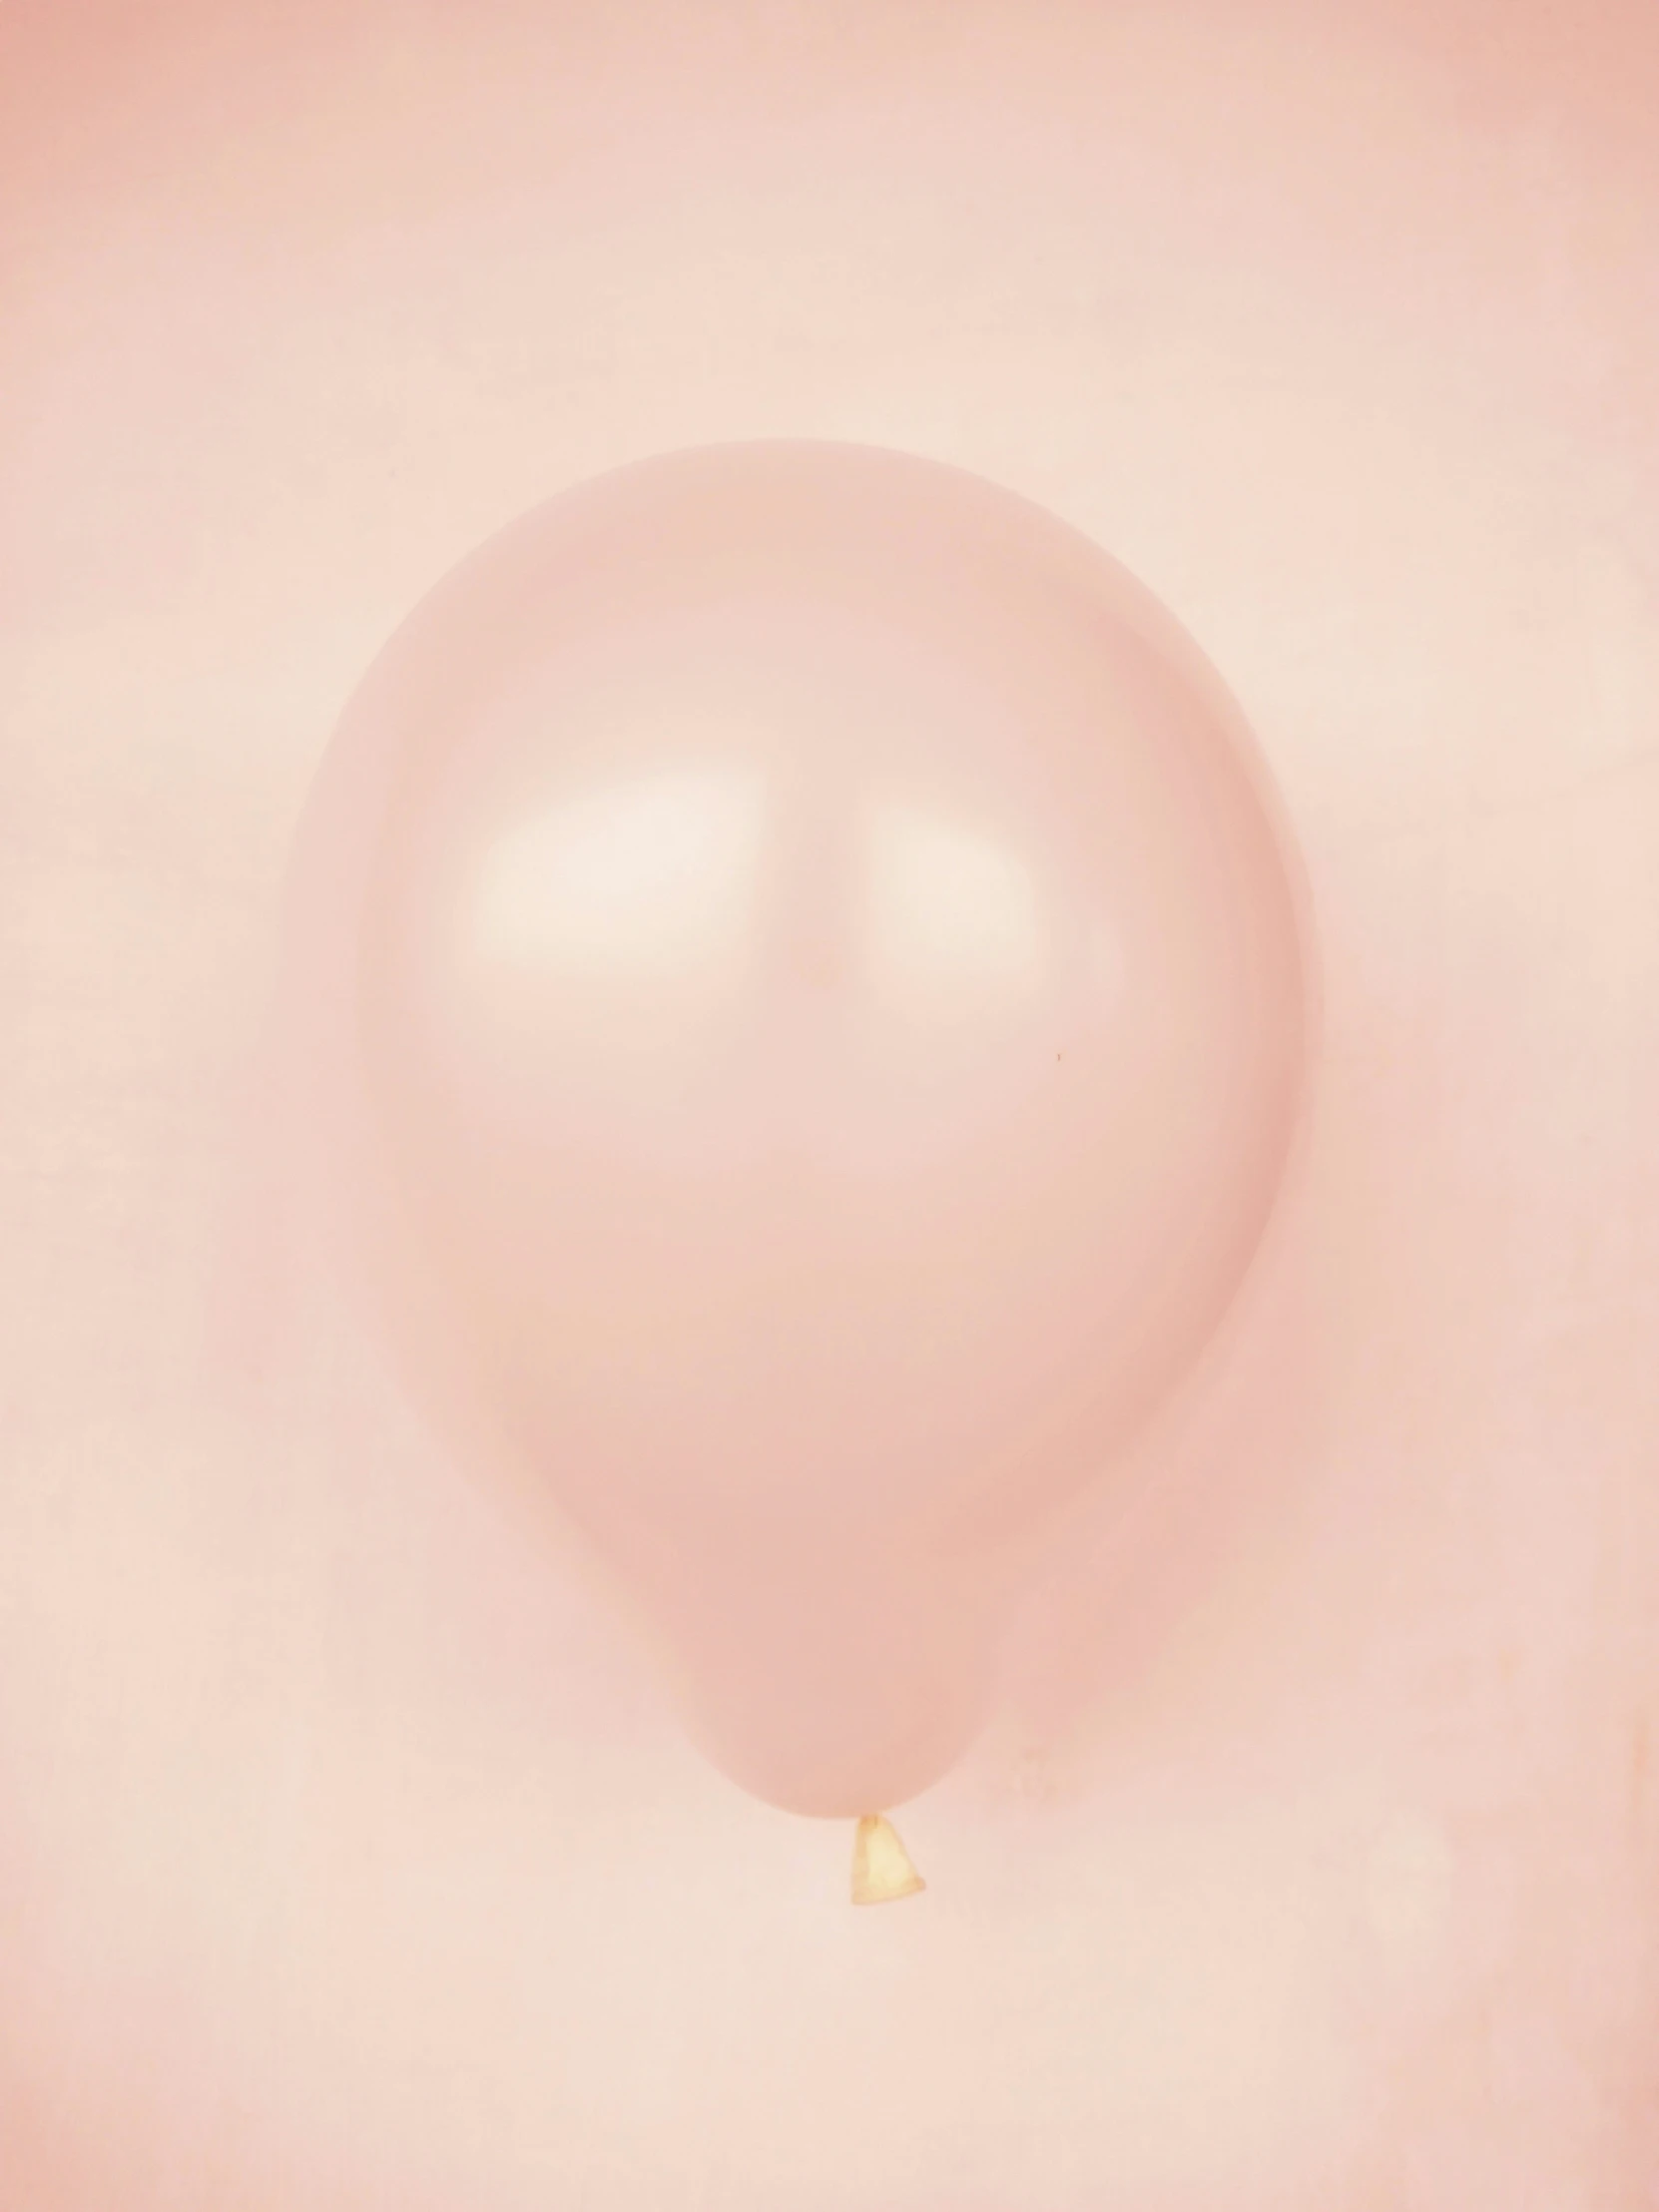 a light colored image of a balloon floating